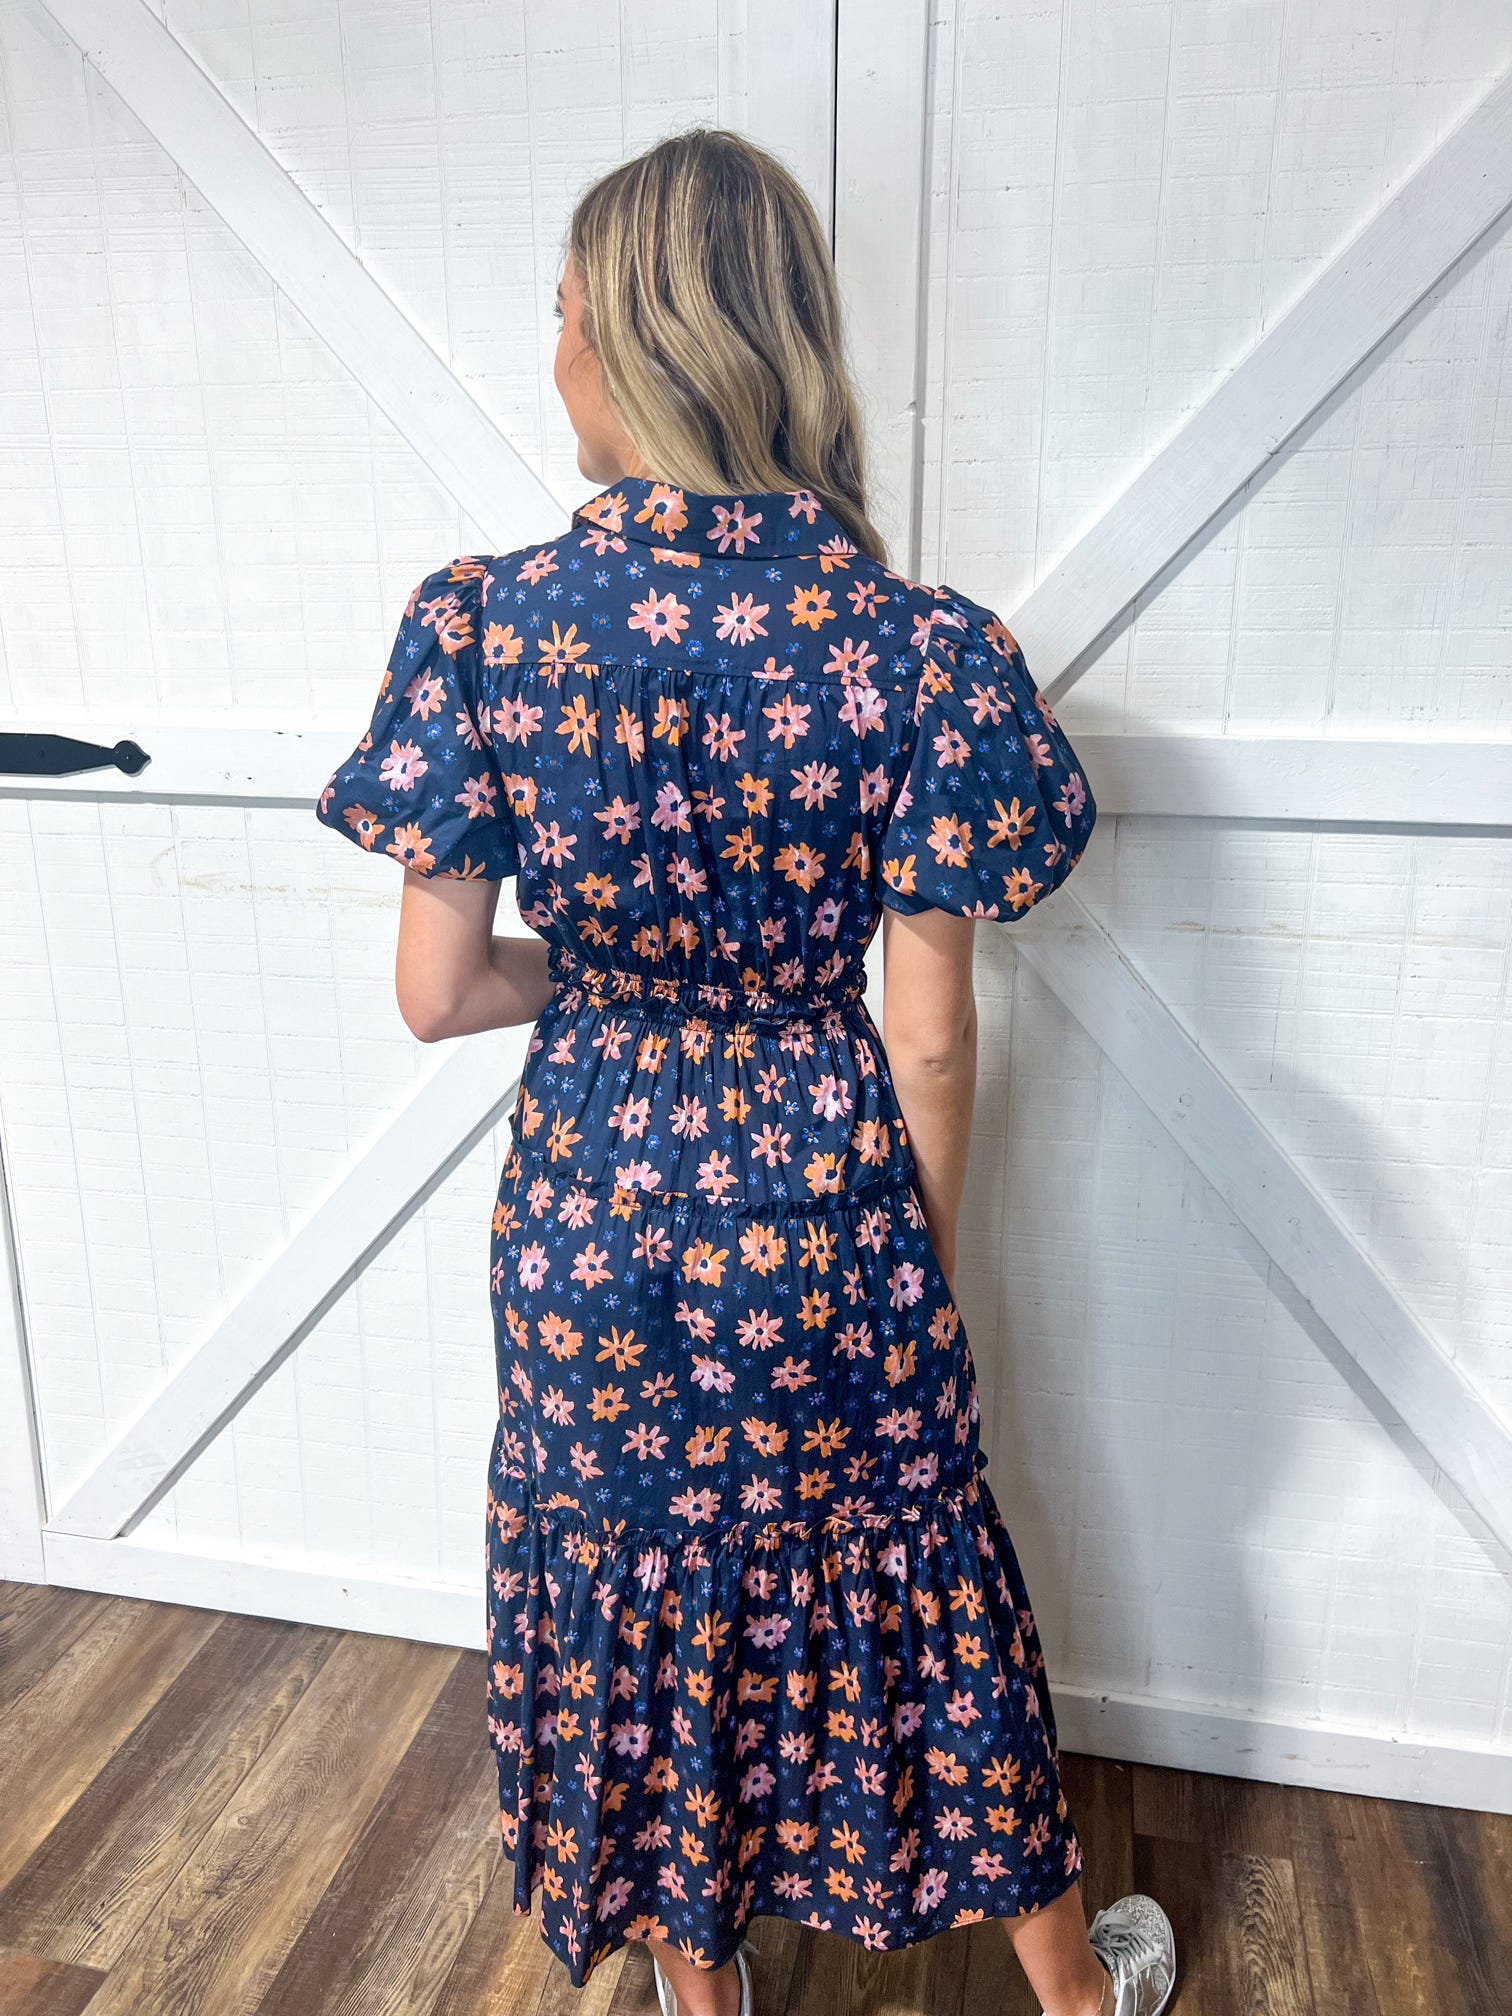 Photo of the back of the navy floral dress